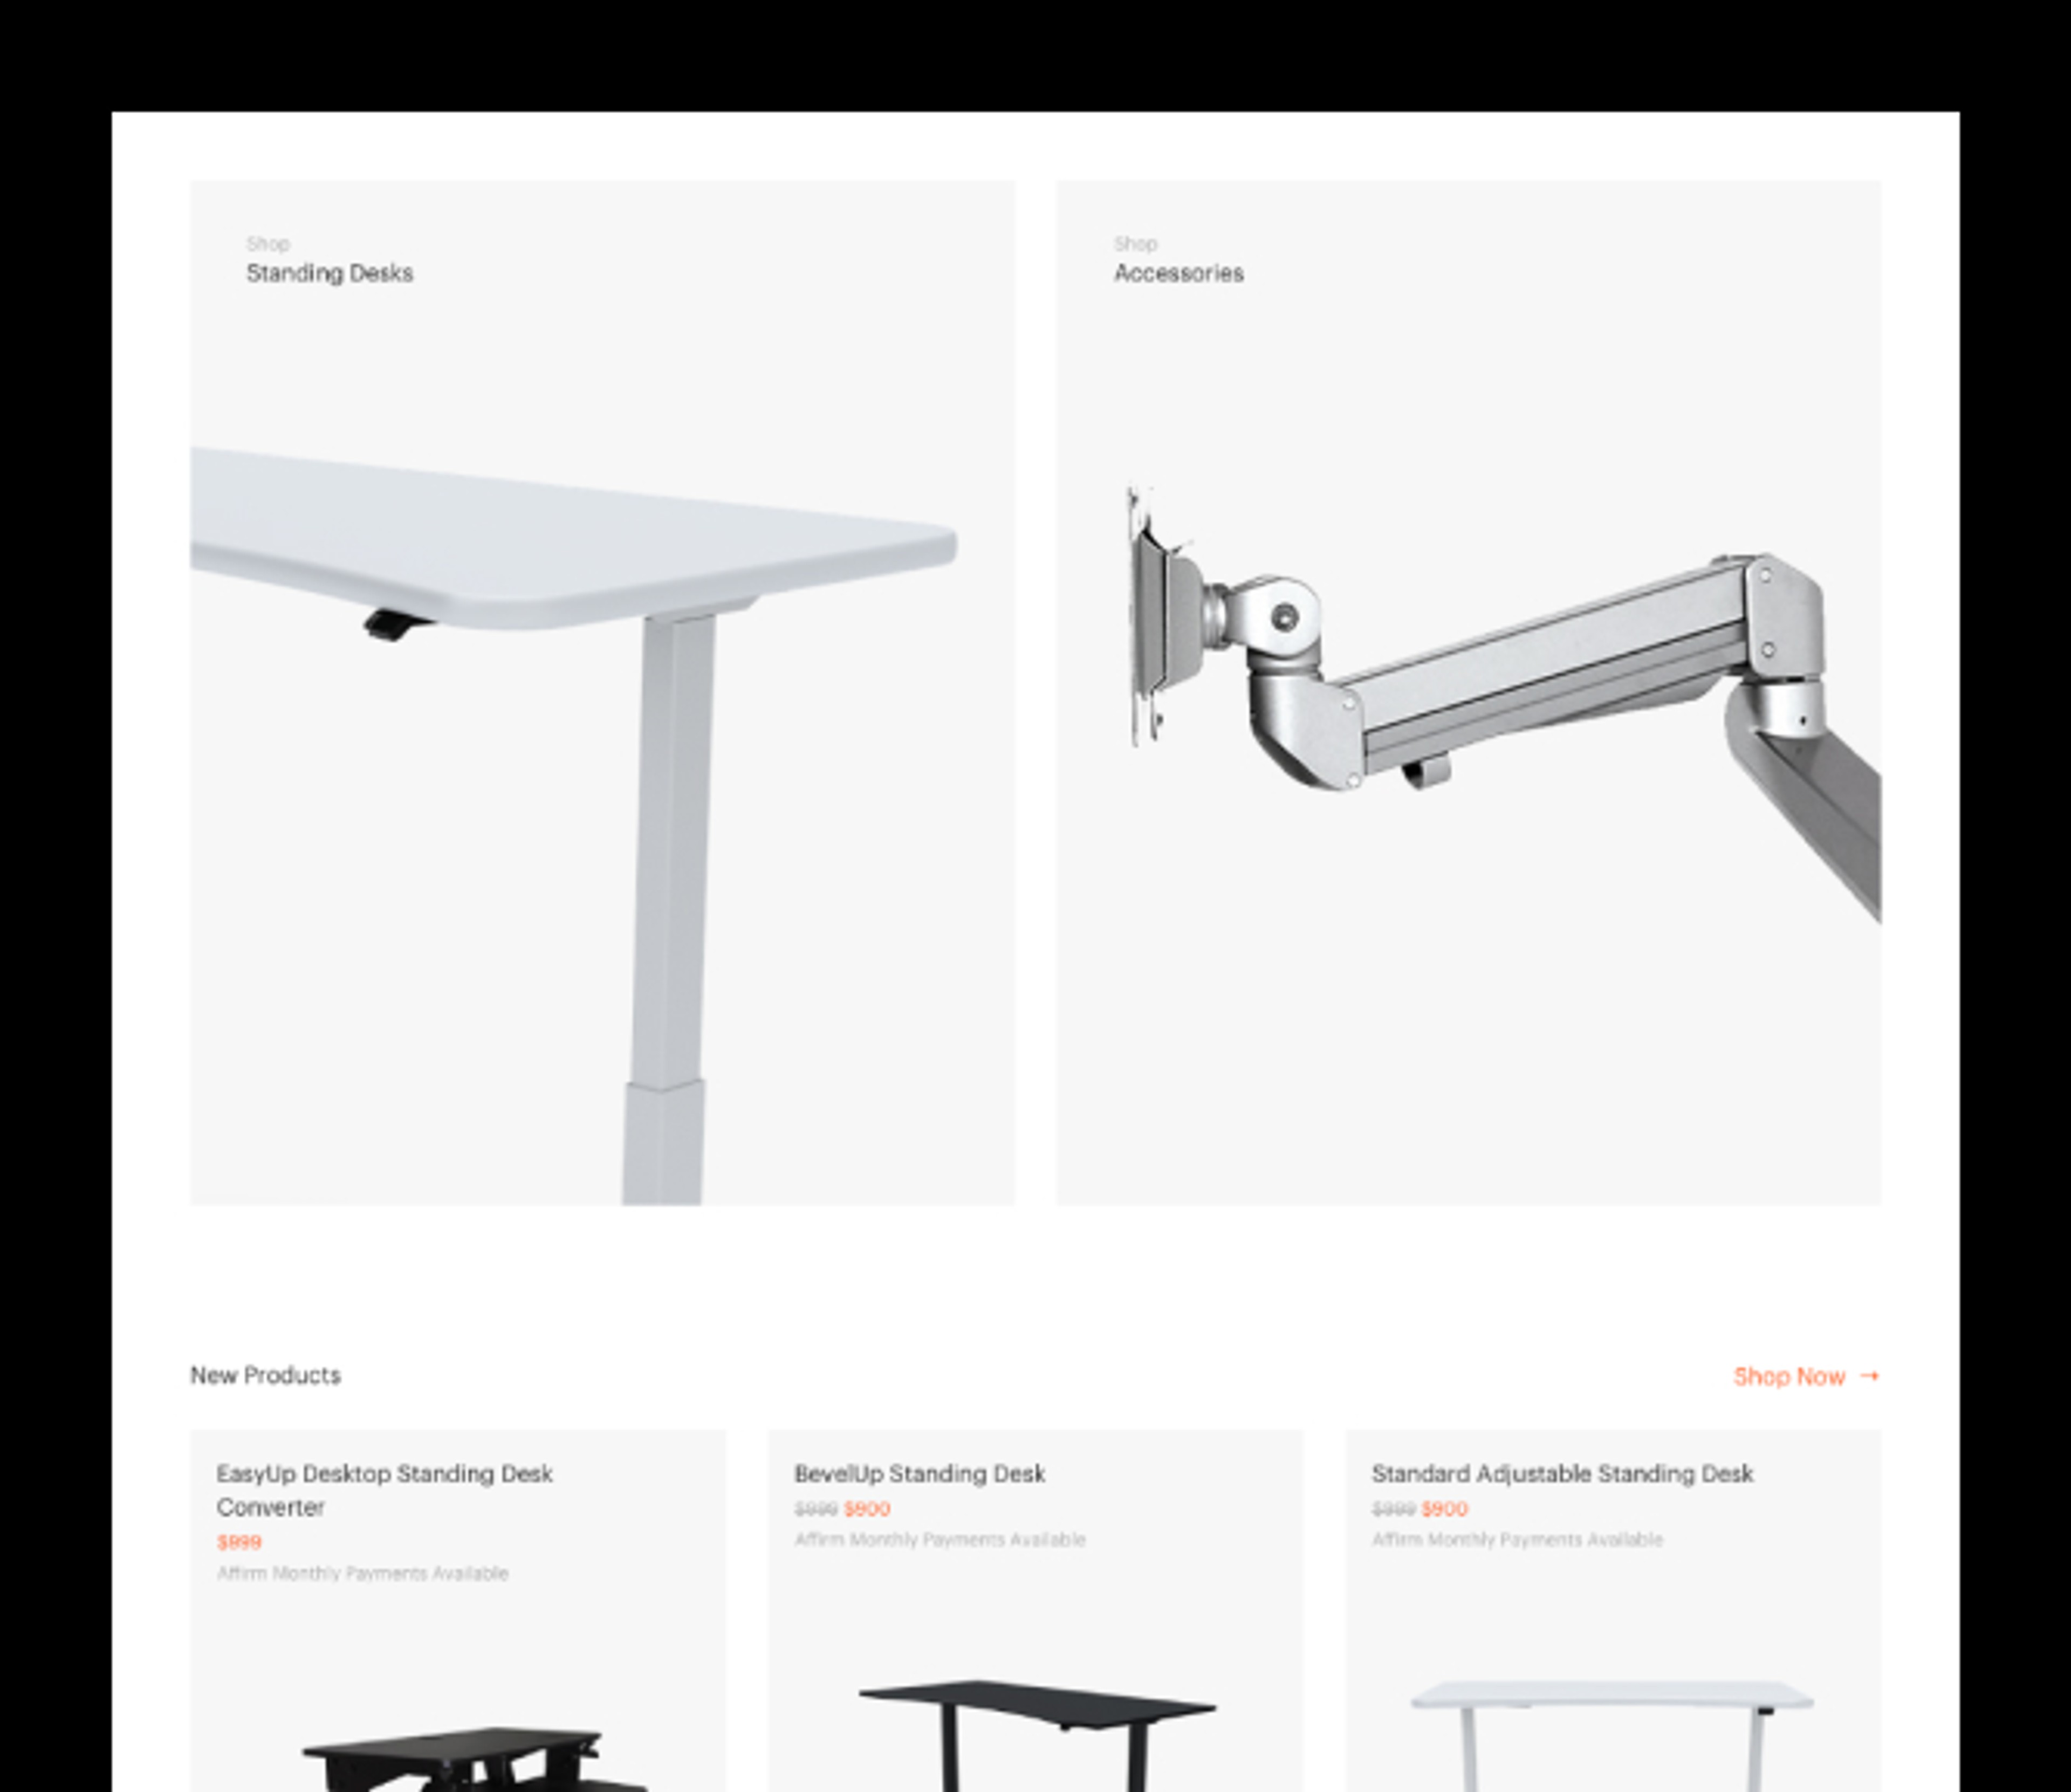 updesk homepage featuring standing desks and accessories